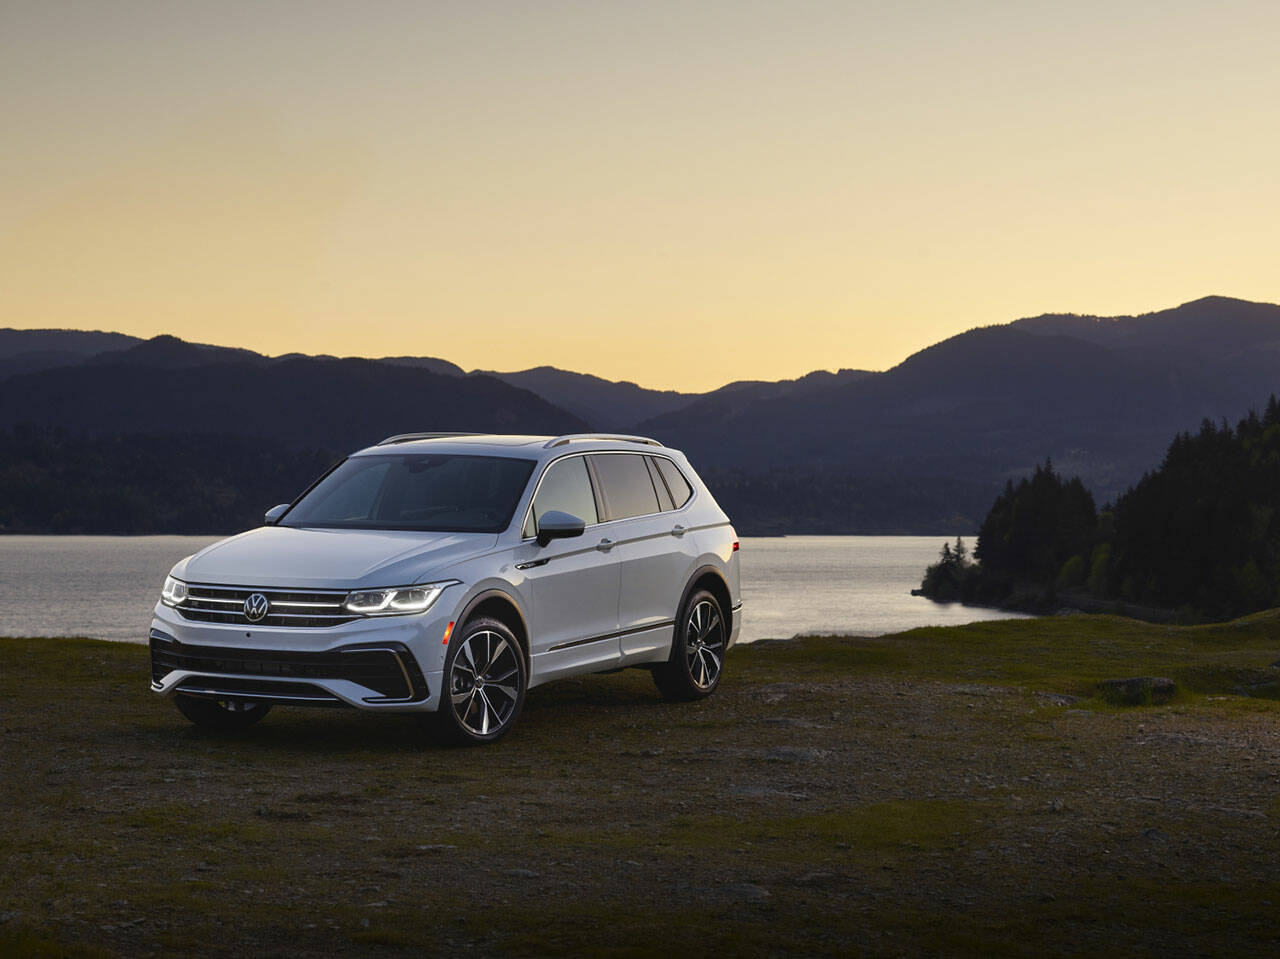 2022 Volkswagen Tiguan has three rows and AWD, separately